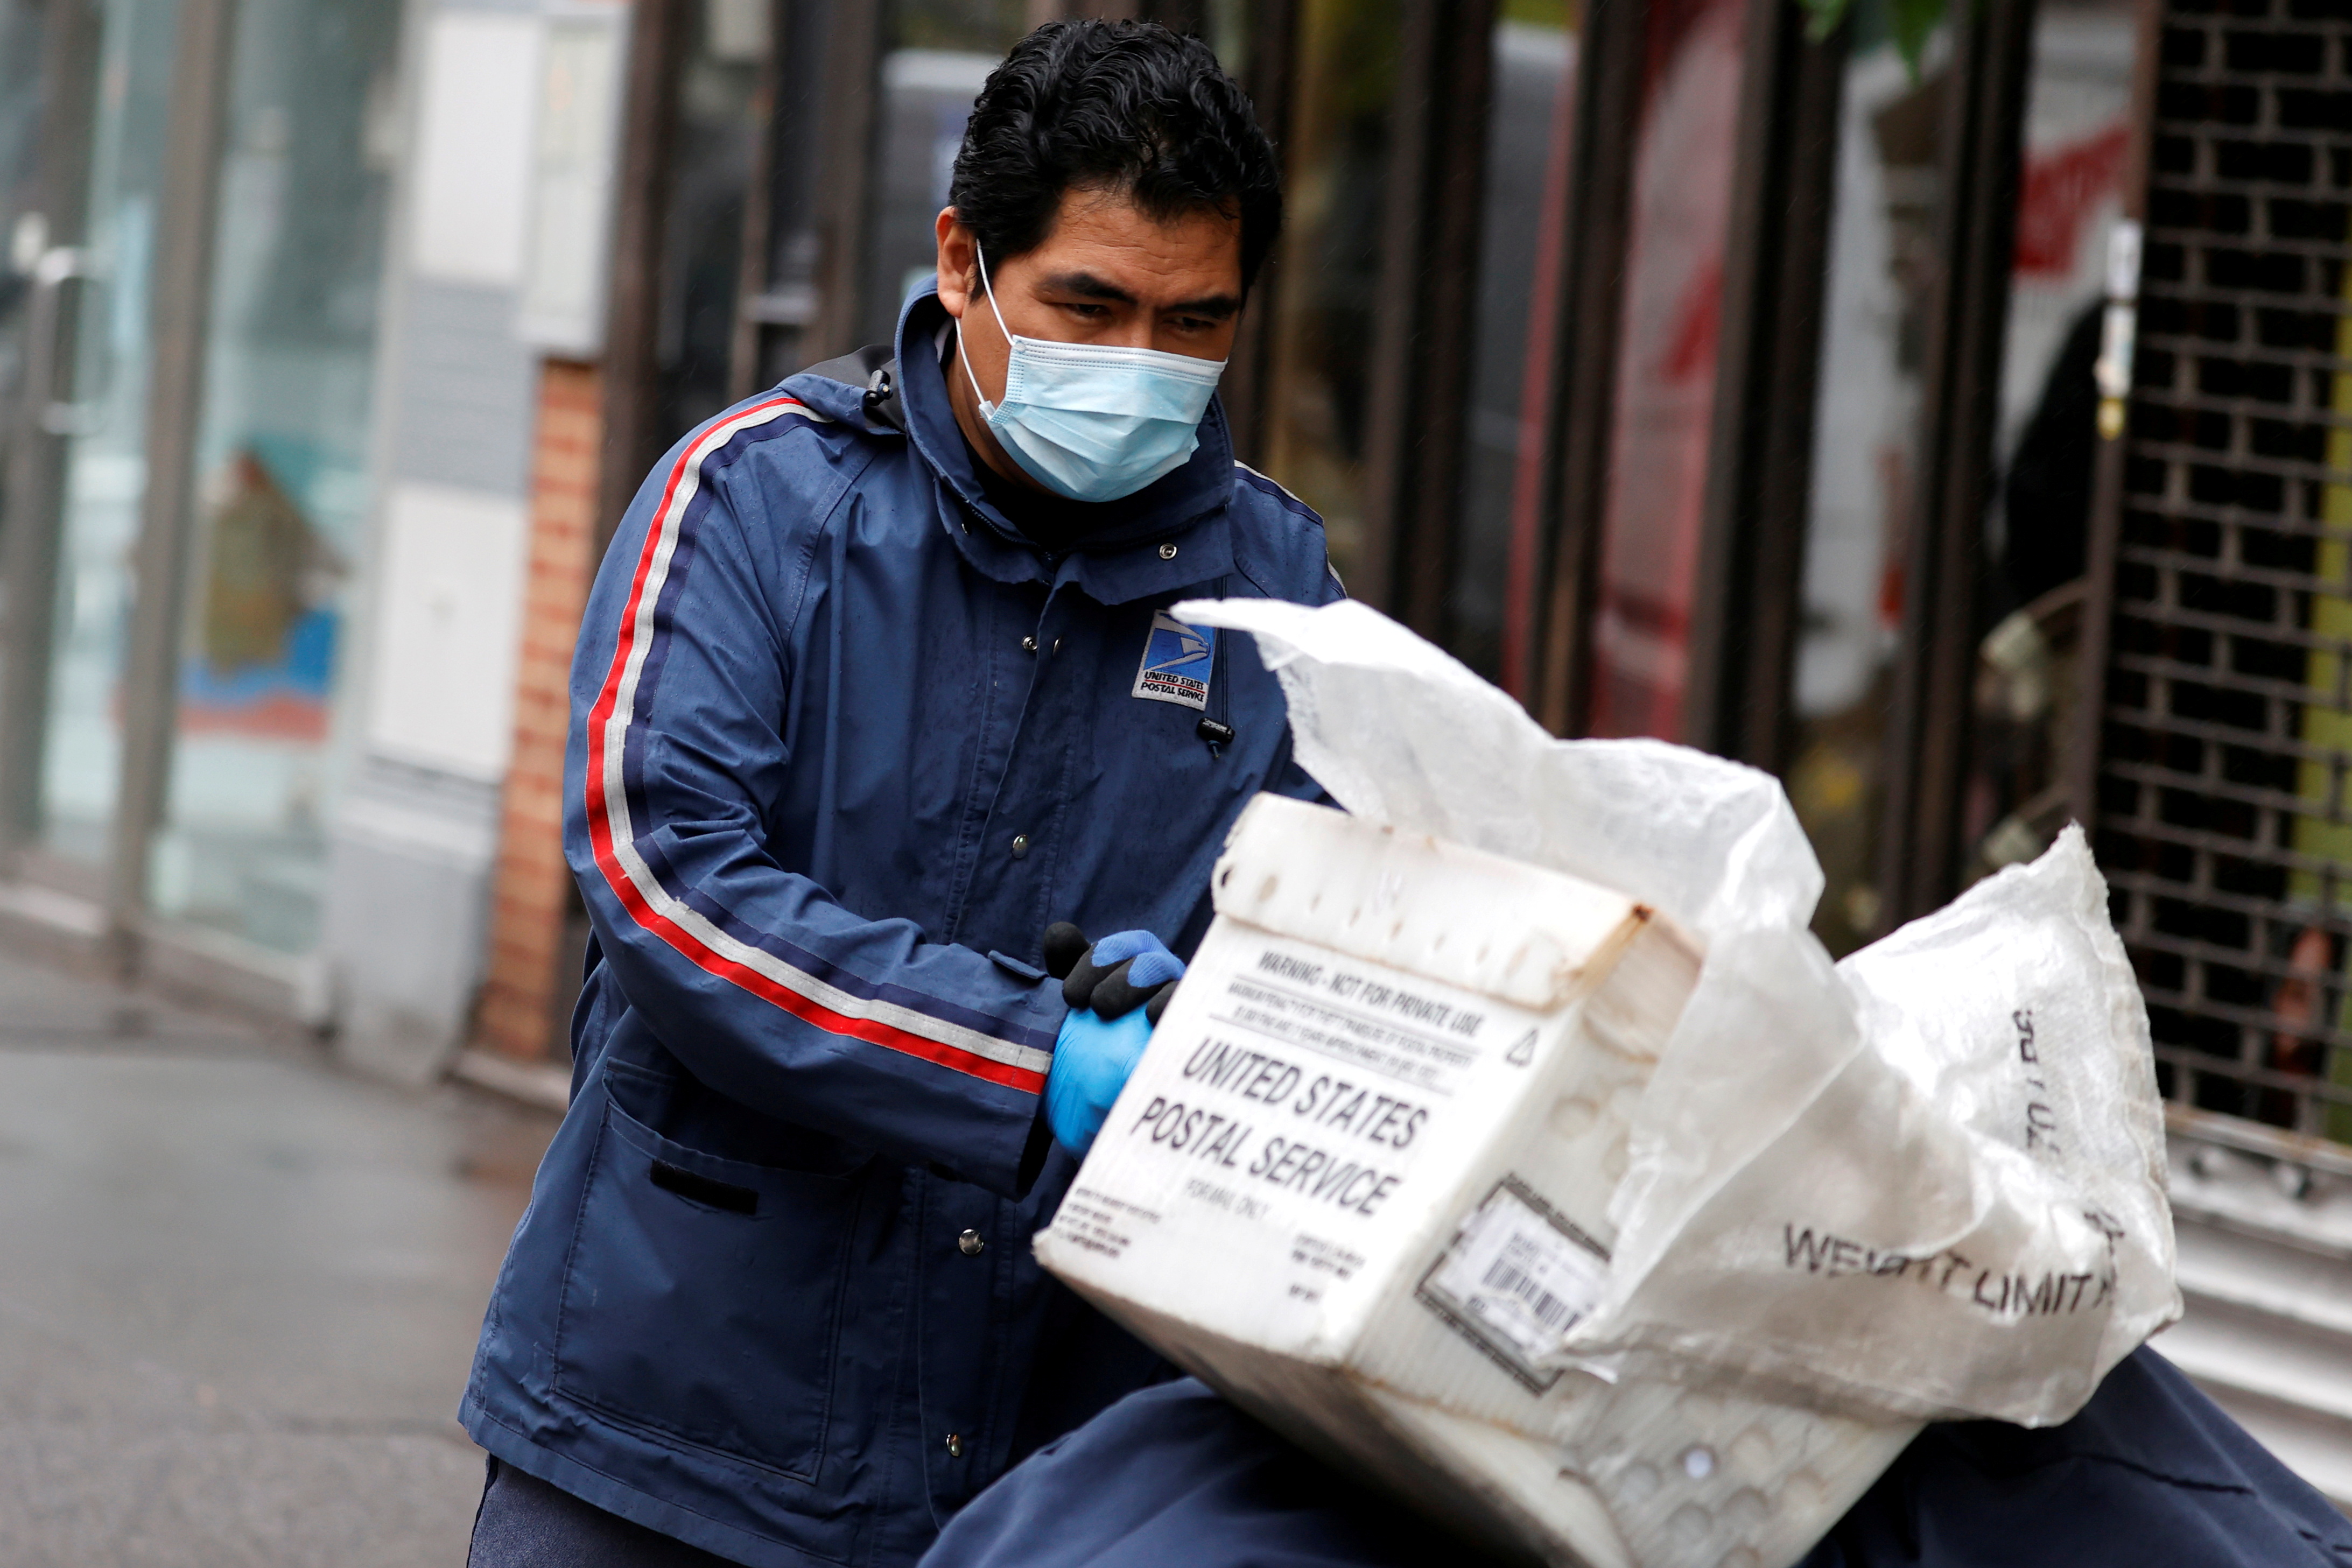 A United States Postal Service (USPS) mail carrier pushes his cart while delivering mail in the rain on Manhattan's Upper West Side during the outbreak of the coronavirus disease (COVID-19) in New York City, New York, U.S., April 13, 2020. REUTERS/Mike Segar/File Photo